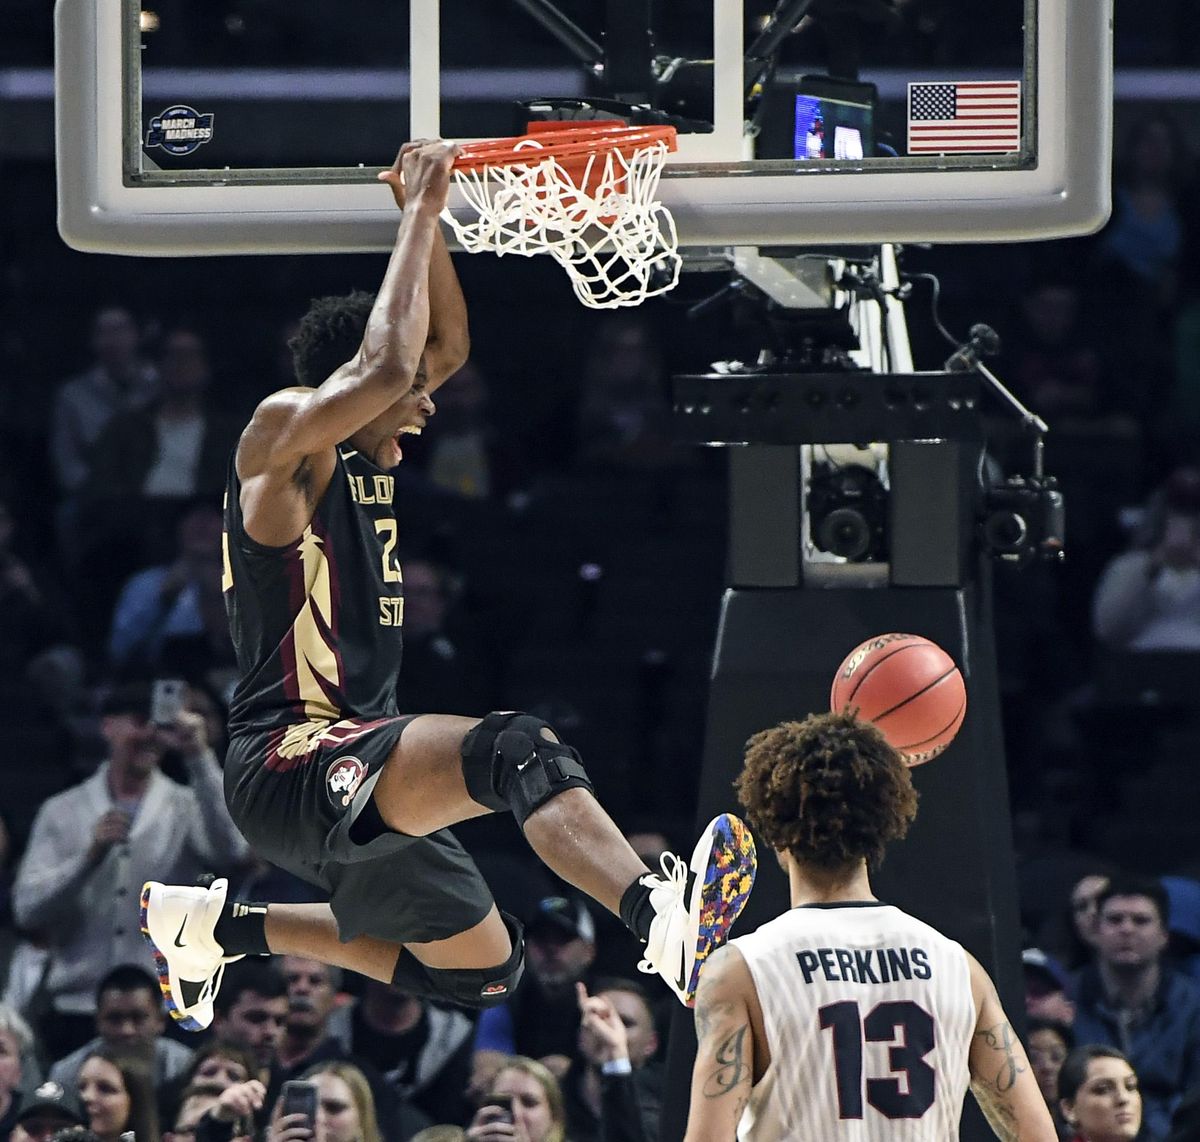 Florida State forward Mfiondu Kabengele slams dunks against Gonzaga guard Josh Perkins late in the Sweet 16 game, Thursday, March 22, 2018, at the Staples Center in Los Angeles. (Dan Pelle / The Spokesman-Review)